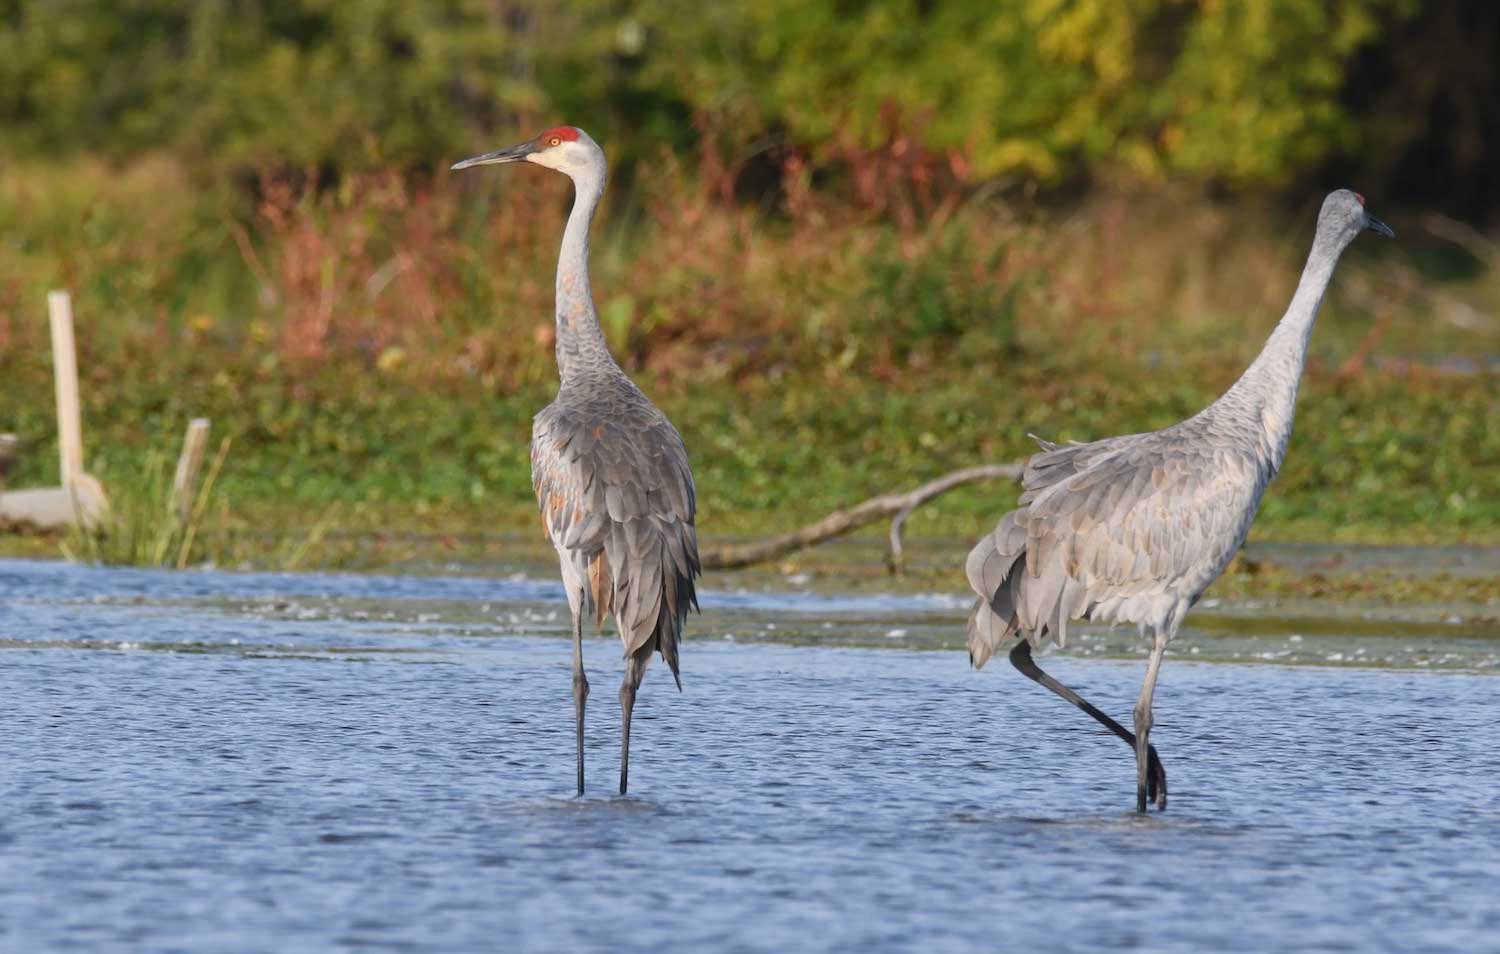 Two sandhill cranes wading in shallow water.